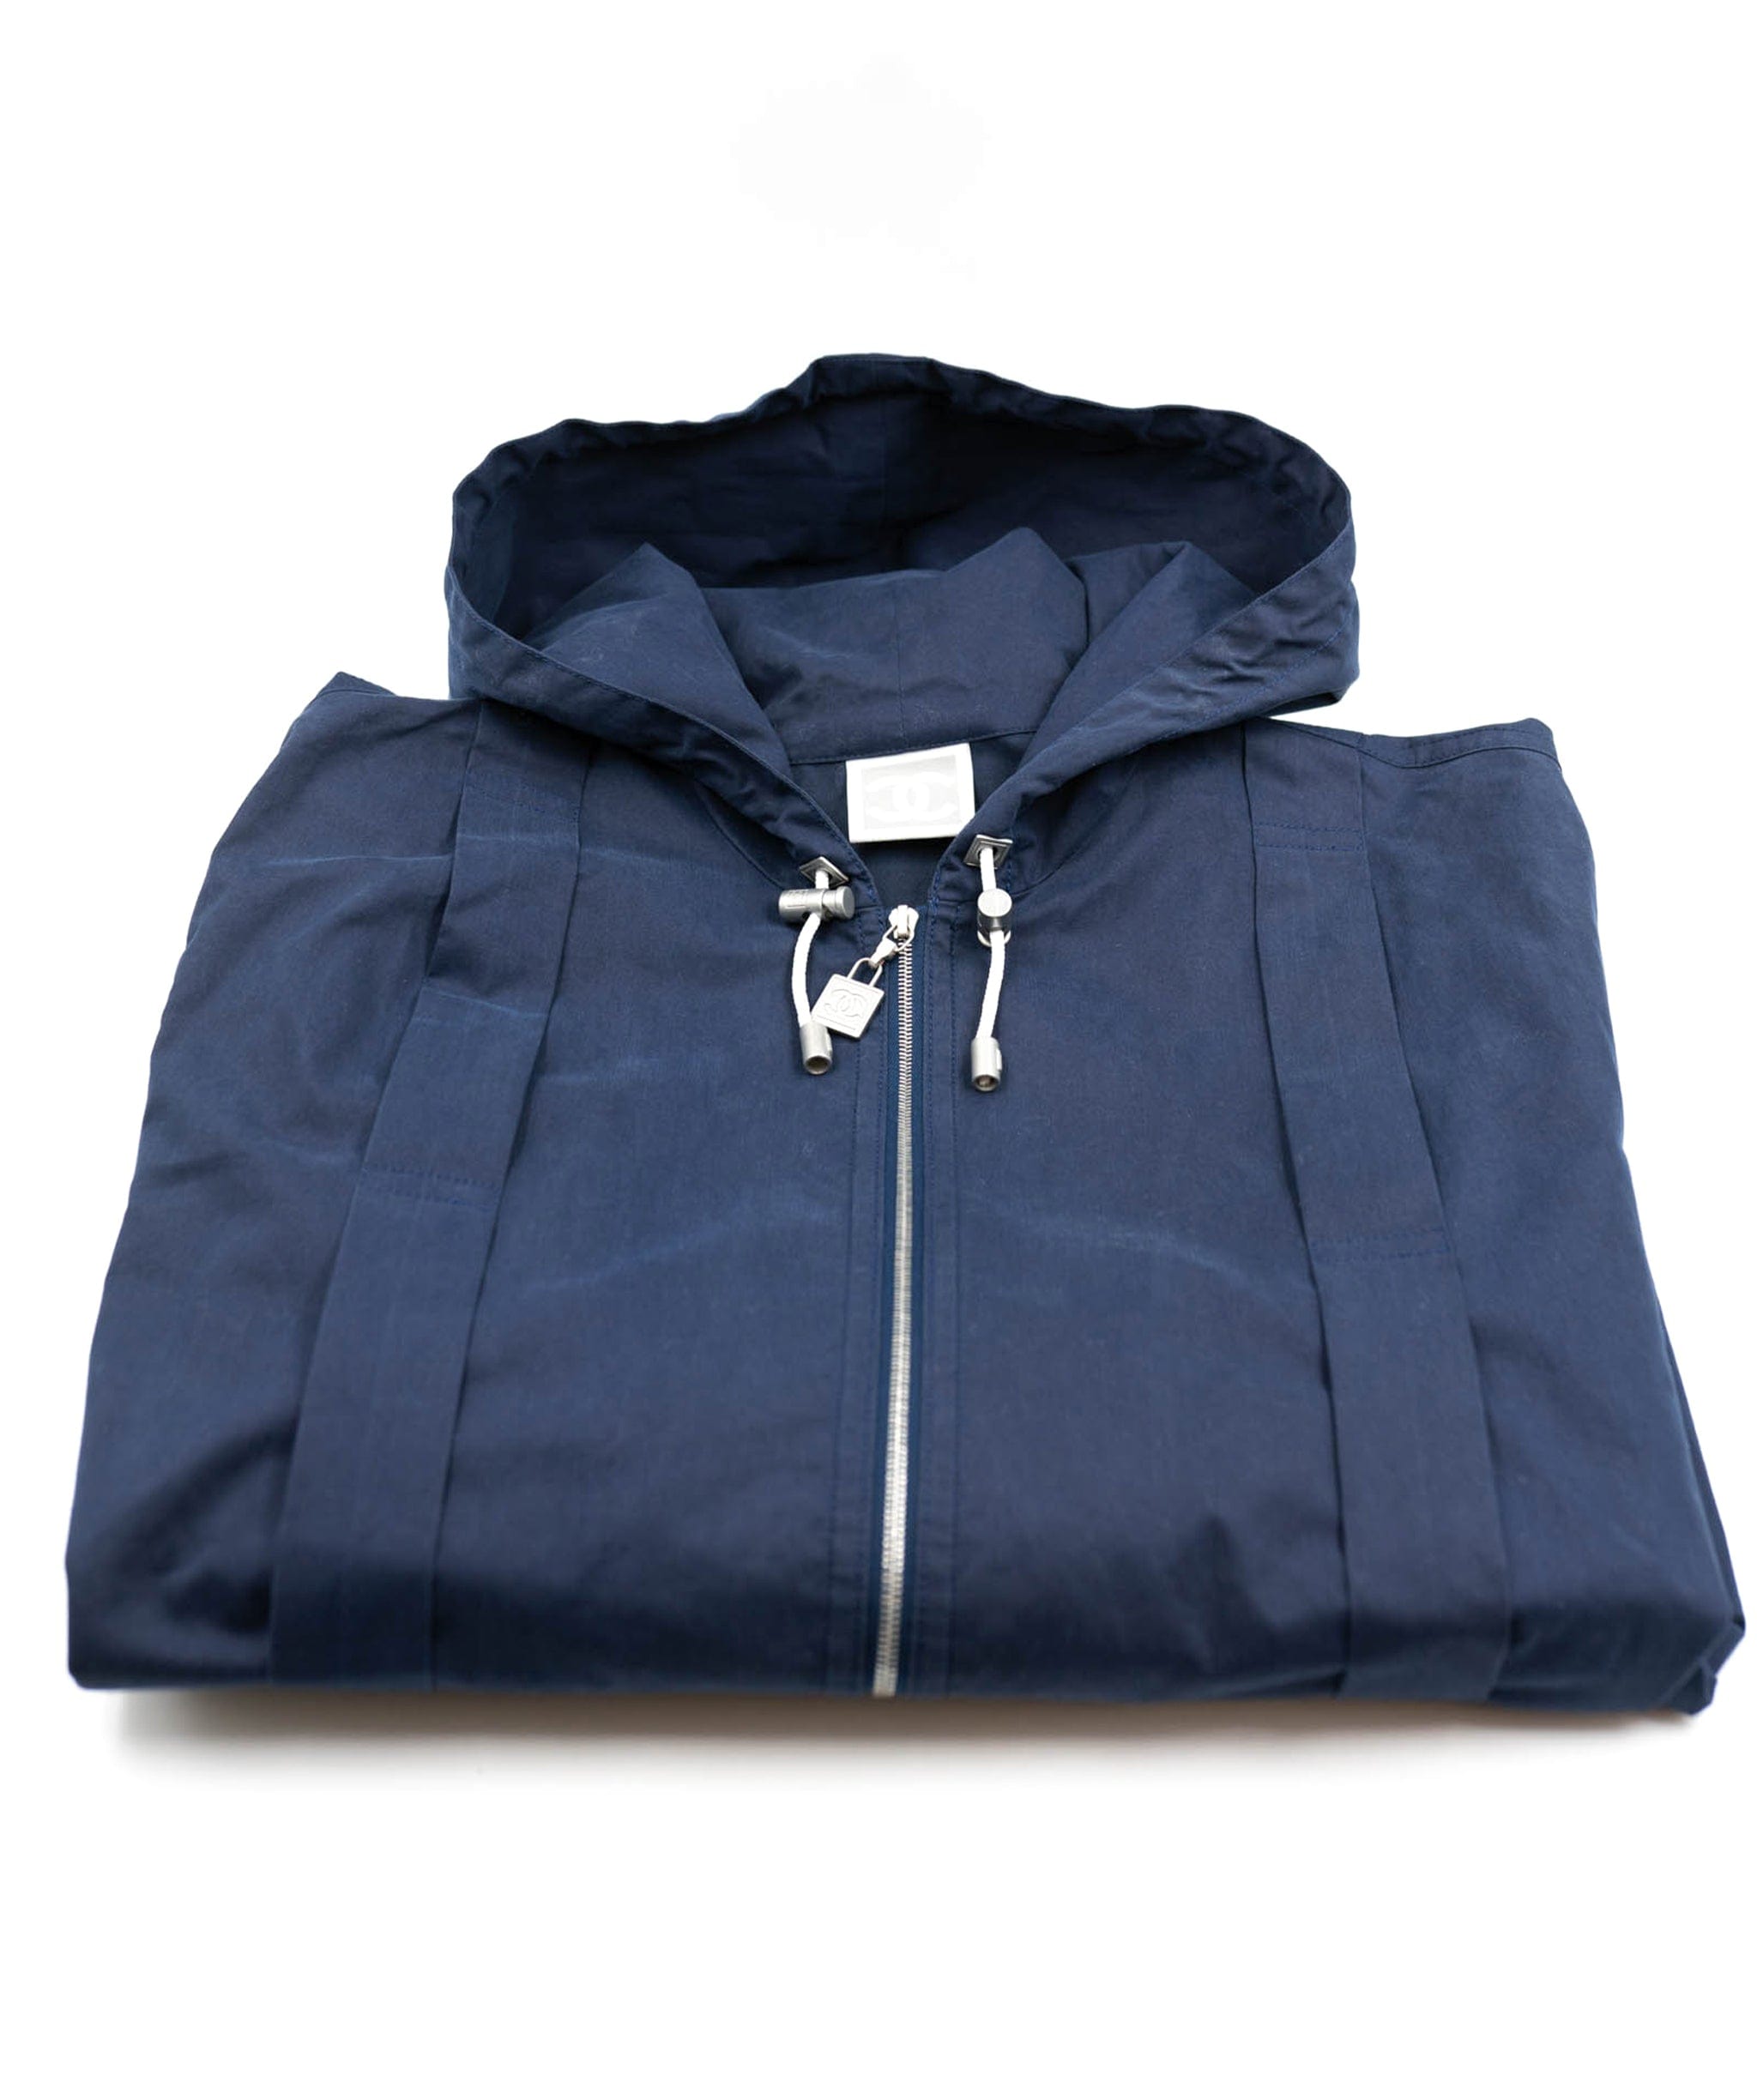 Chanel Chanel 05P Hooded Jacket Navy ASL4616